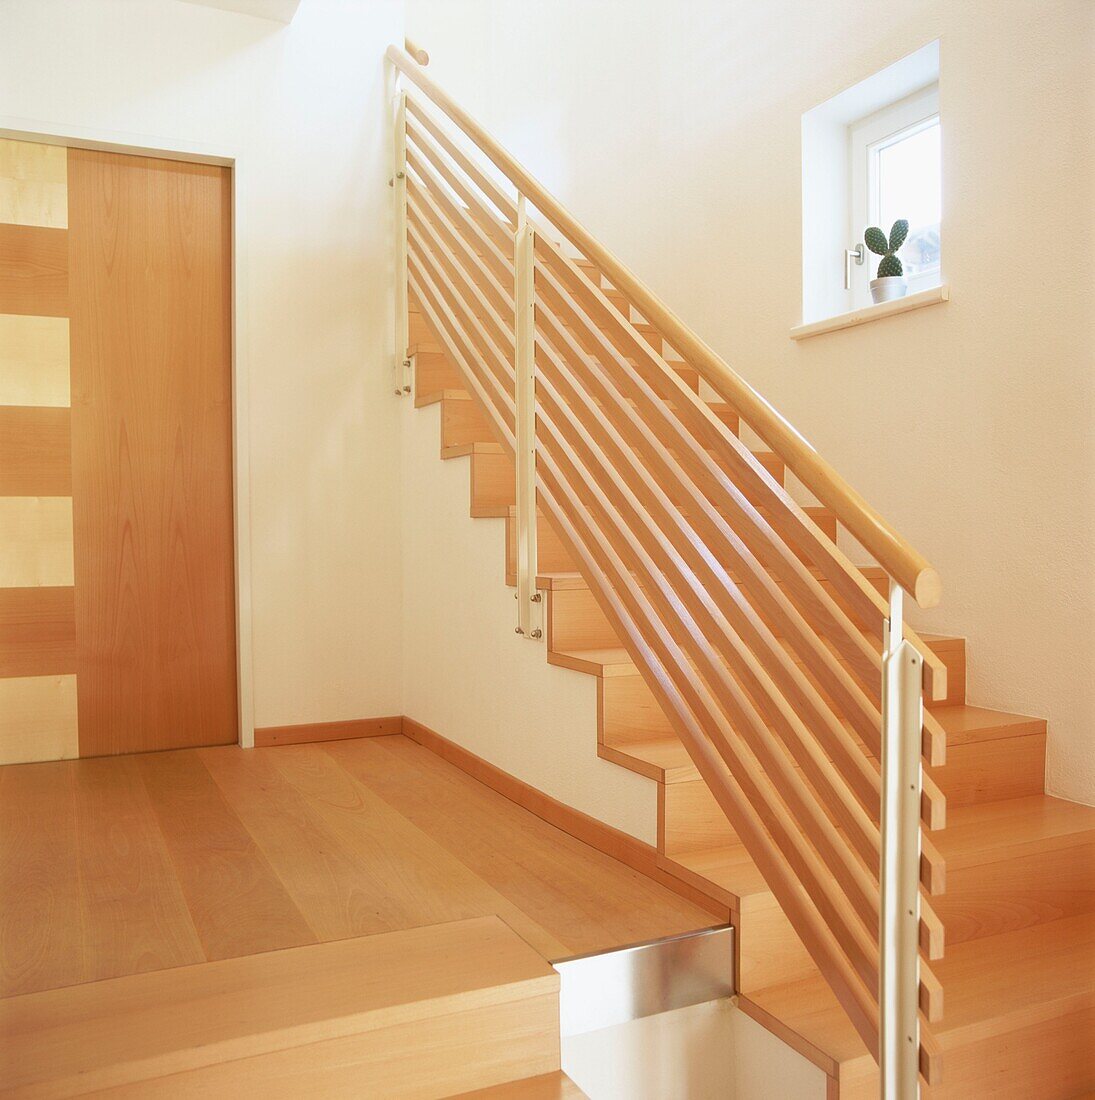 Contemporary entrance hall stairs and landing with wooden floors and steps